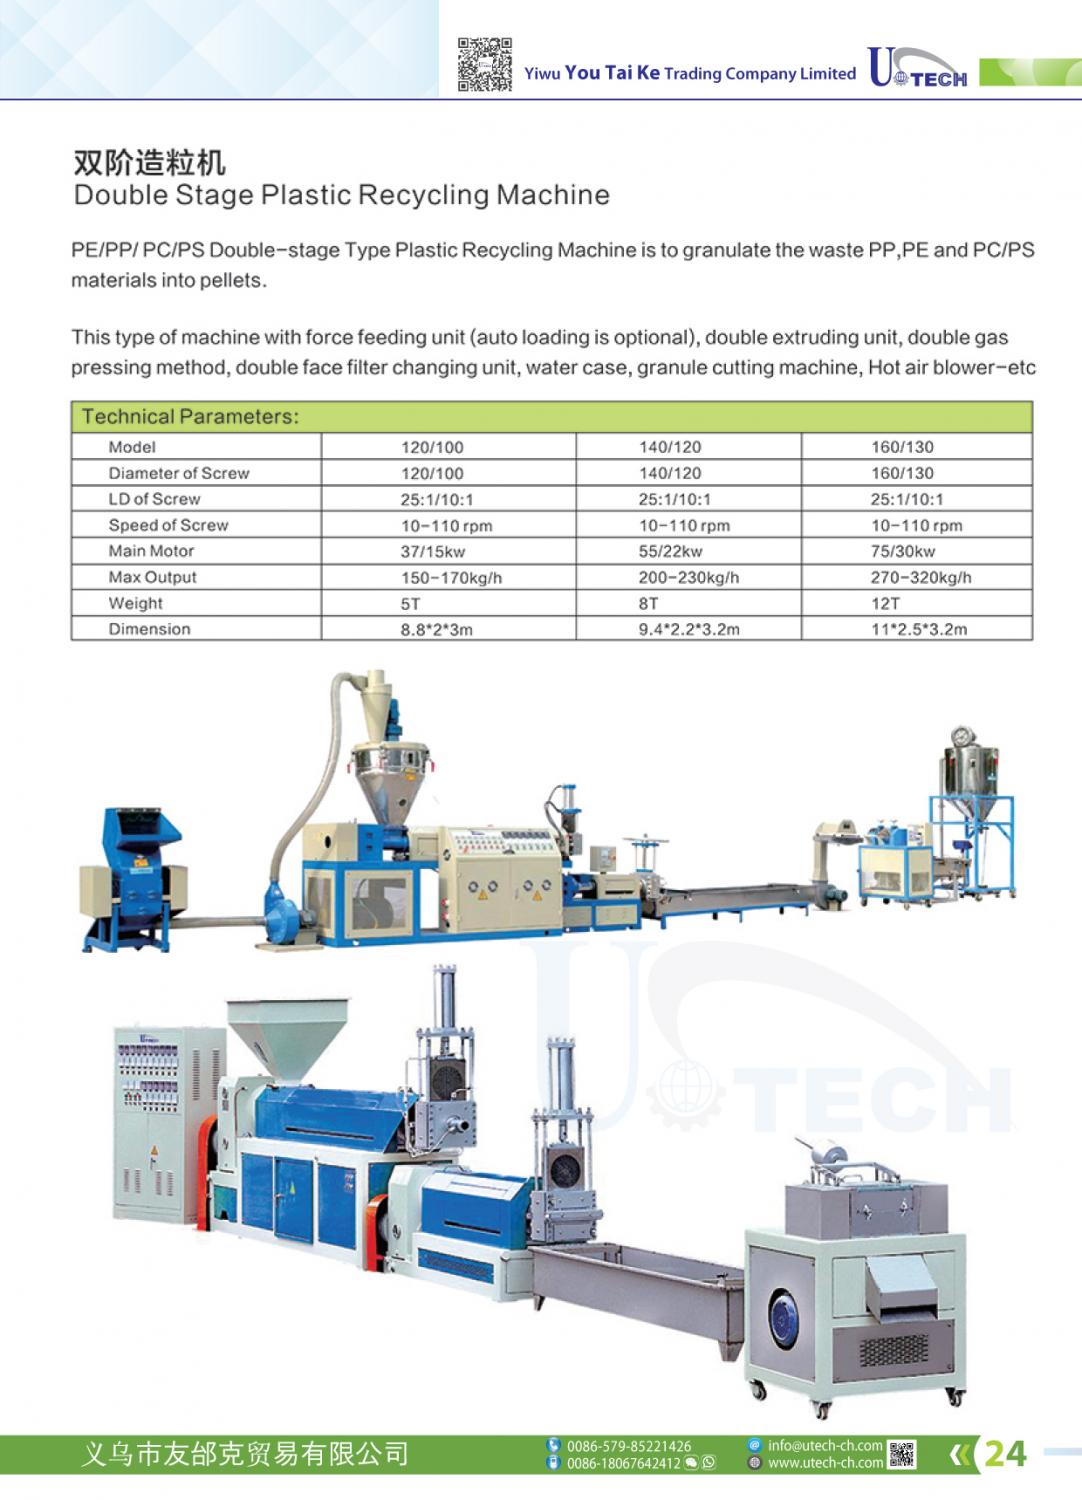 Double Stage Plastic Recycling Machine	